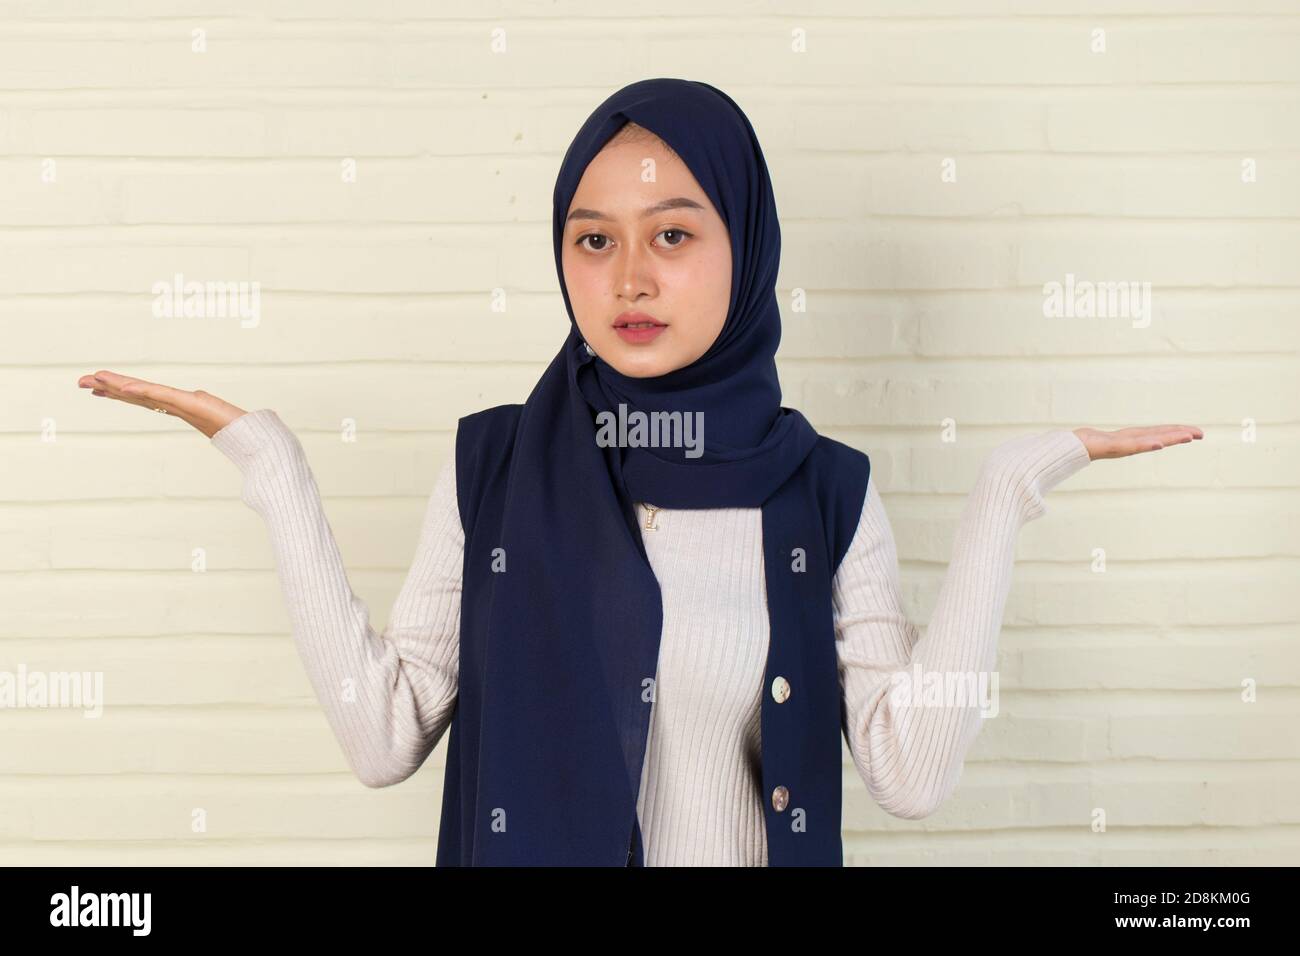 Young asianwoman wearing hijab smiling confident pointing with fingers to different directions. Stock Photo